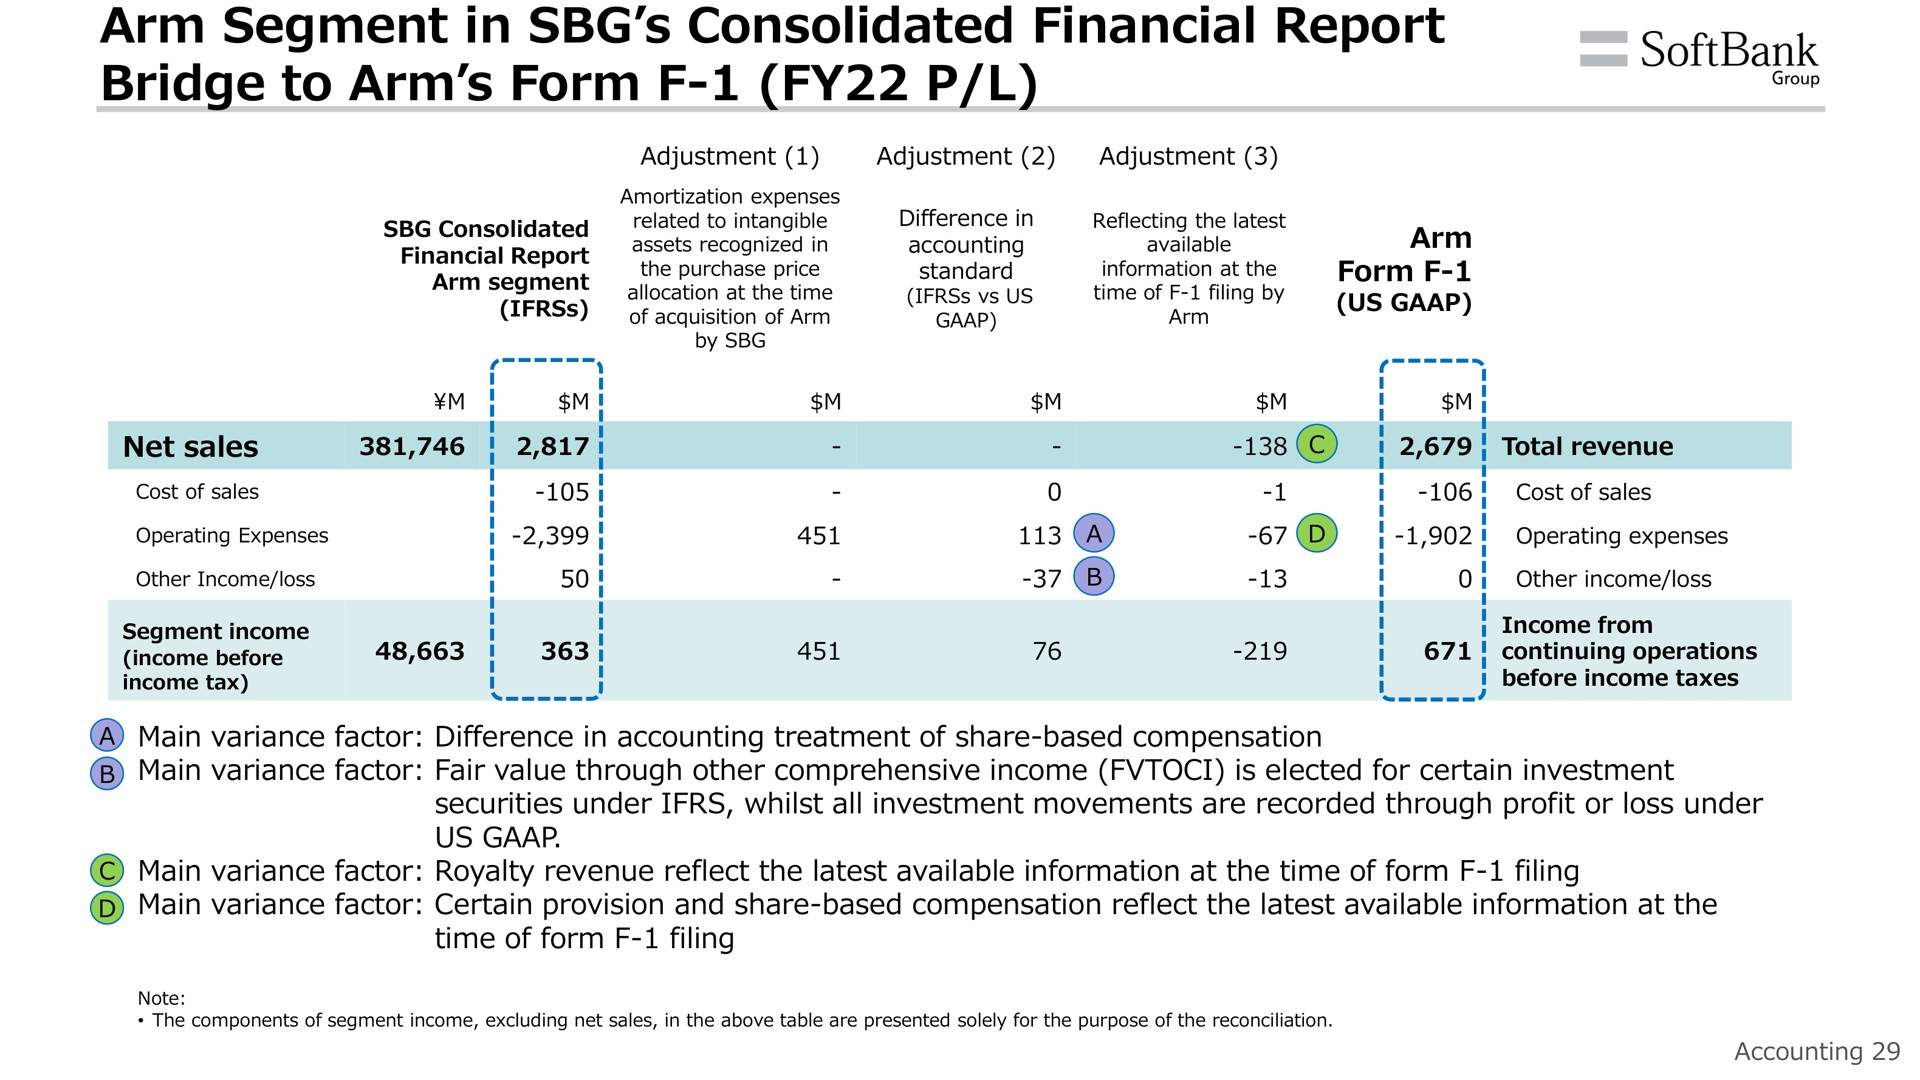 arm segment in consolidated financial report bridge to arm form | SoftBank